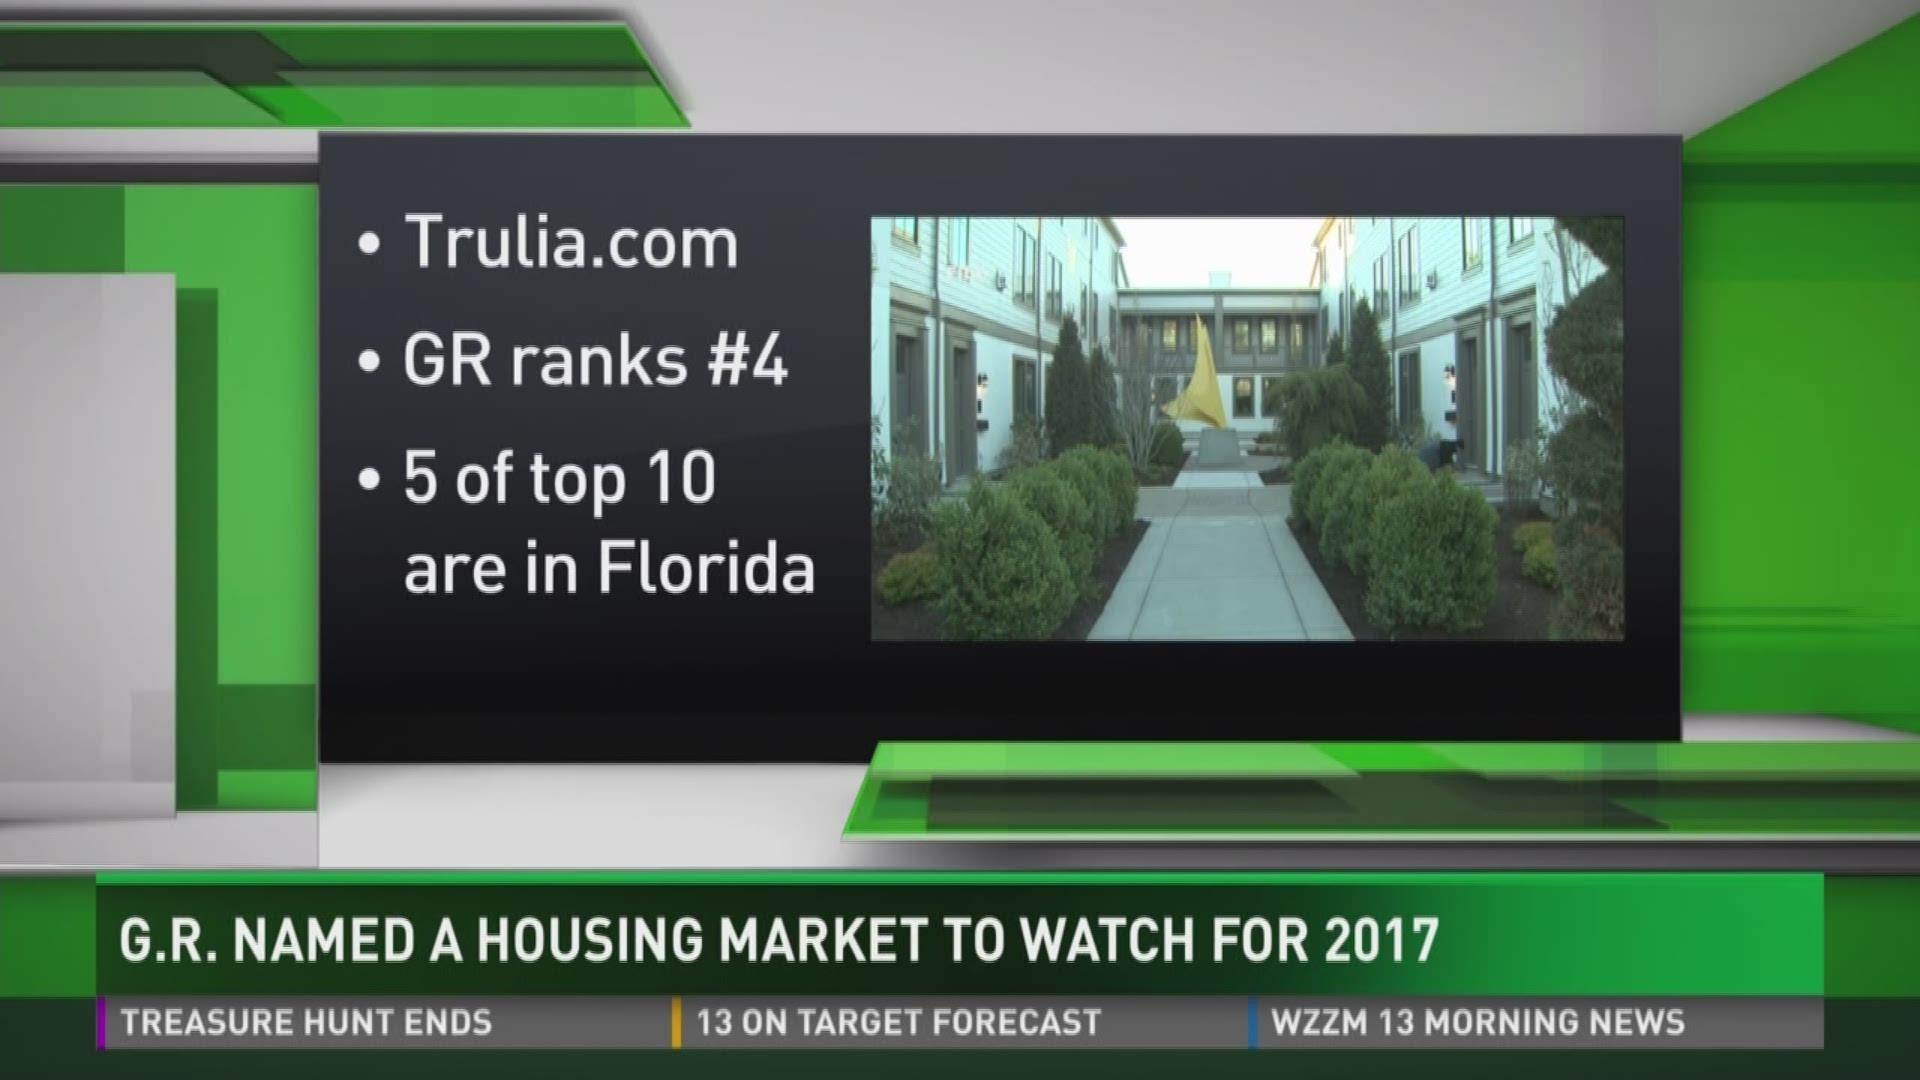 GR named a housing market to watch for 2017